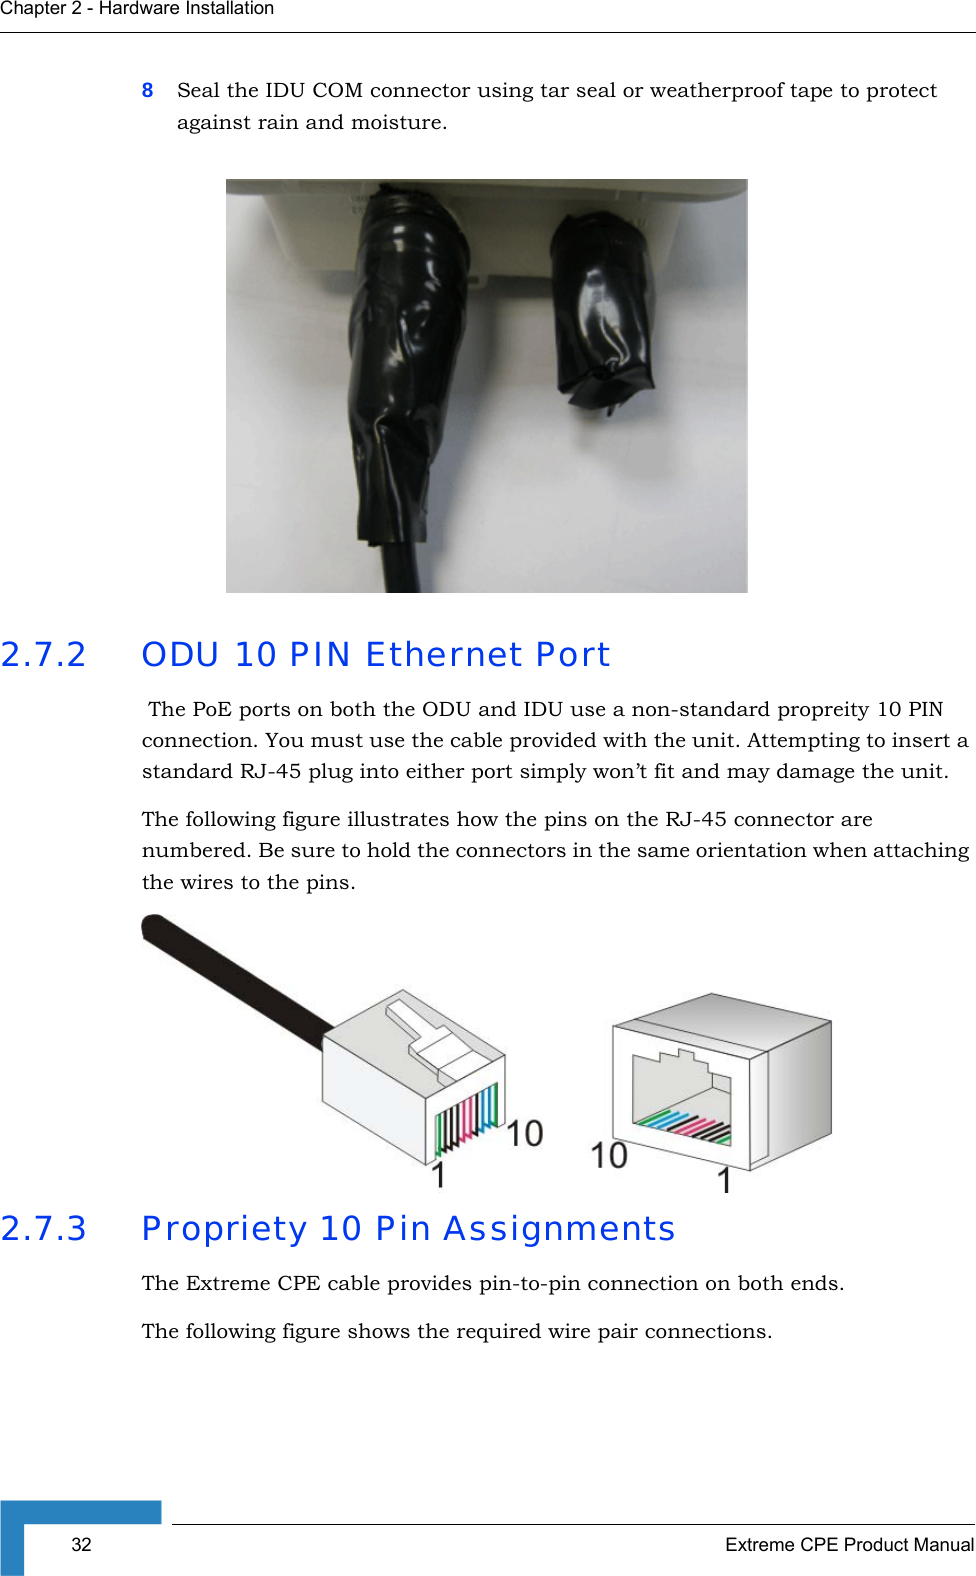 32 Extreme CPE Product ManualChapter 2 - Hardware Installation8Seal the IDU COM connector using tar seal or weatherproof tape to protect against rain and moisture.2.7.2 ODU 10 PIN Ethernet Port The PoE ports on both the ODU and IDU use a non-standard propreity 10 PIN connection. You must use the cable provided with the unit. Attempting to insert a standard RJ-45 plug into either port simply won’t fit and may damage the unit.The following figure illustrates how the pins on the RJ-45 connector are numbered. Be sure to hold the connectors in the same orientation when attaching the wires to the pins.2.7.3 Propriety 10 Pin AssignmentsThe Extreme CPE cable provides pin-to-pin connection on both ends. The following figure shows the required wire pair connections.